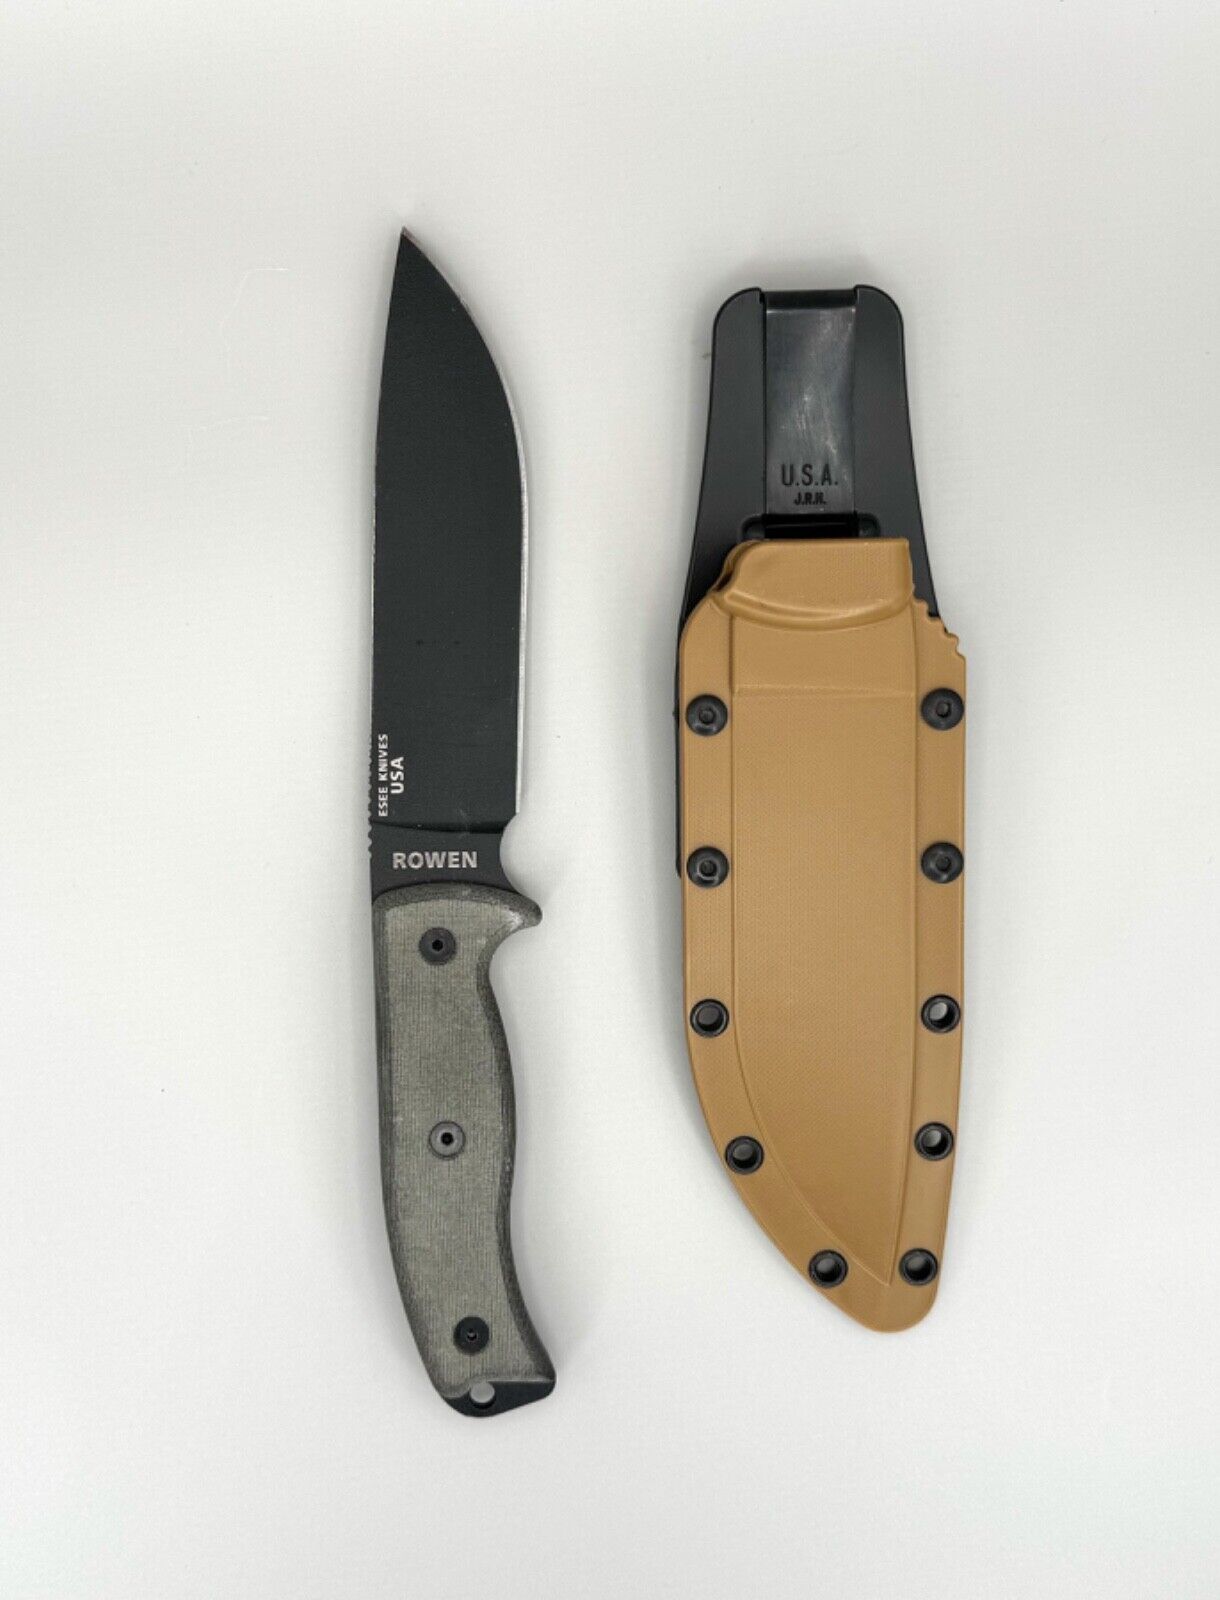 ESEE-6 Fixed Blade Knife Survival Tactical Bushcraft Camping